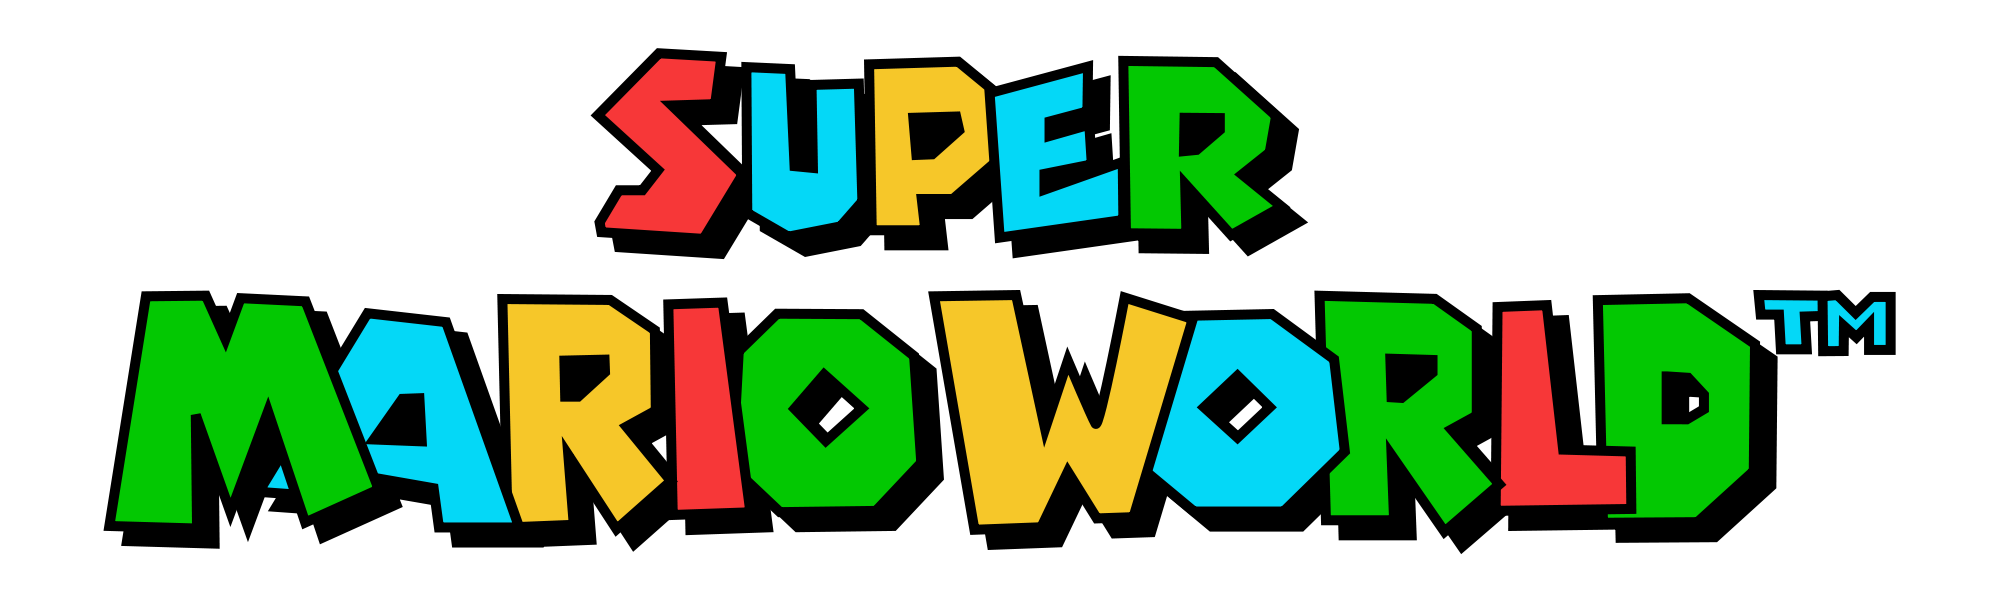 Text Brand Wii Mario Bros World Super PNG Image